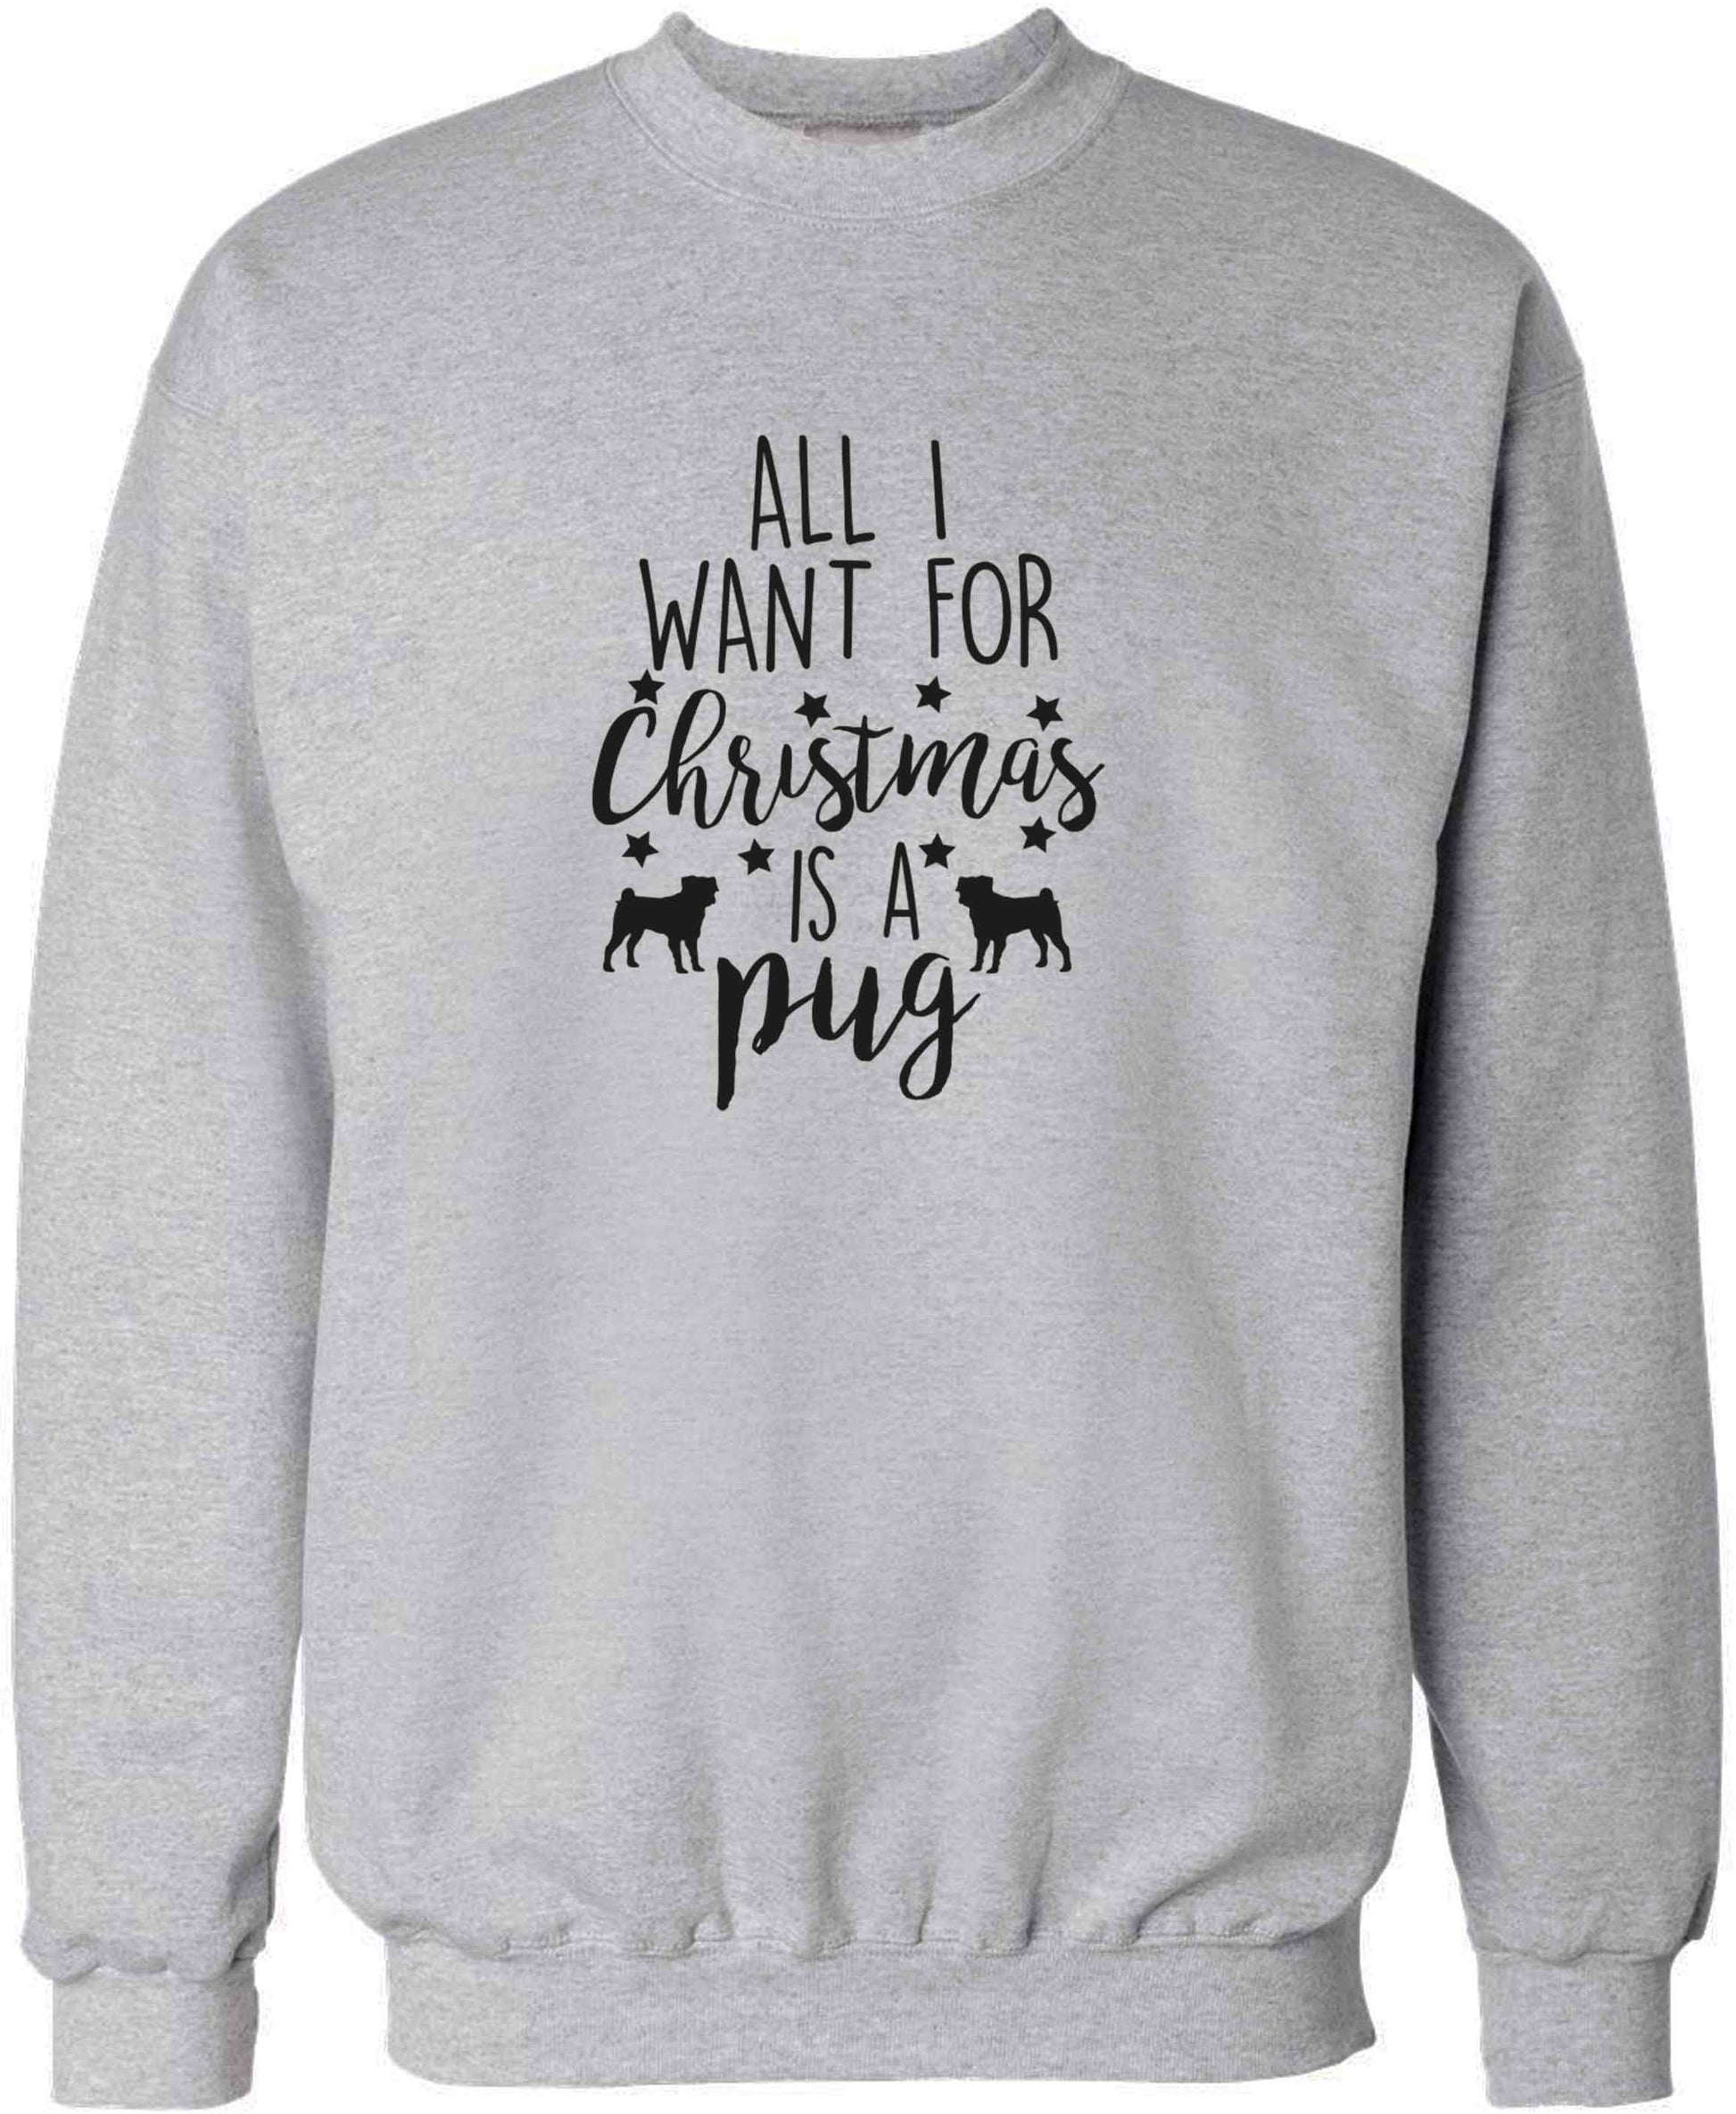 All I want for Christmas is a pug adult's unisex grey sweater 2XL